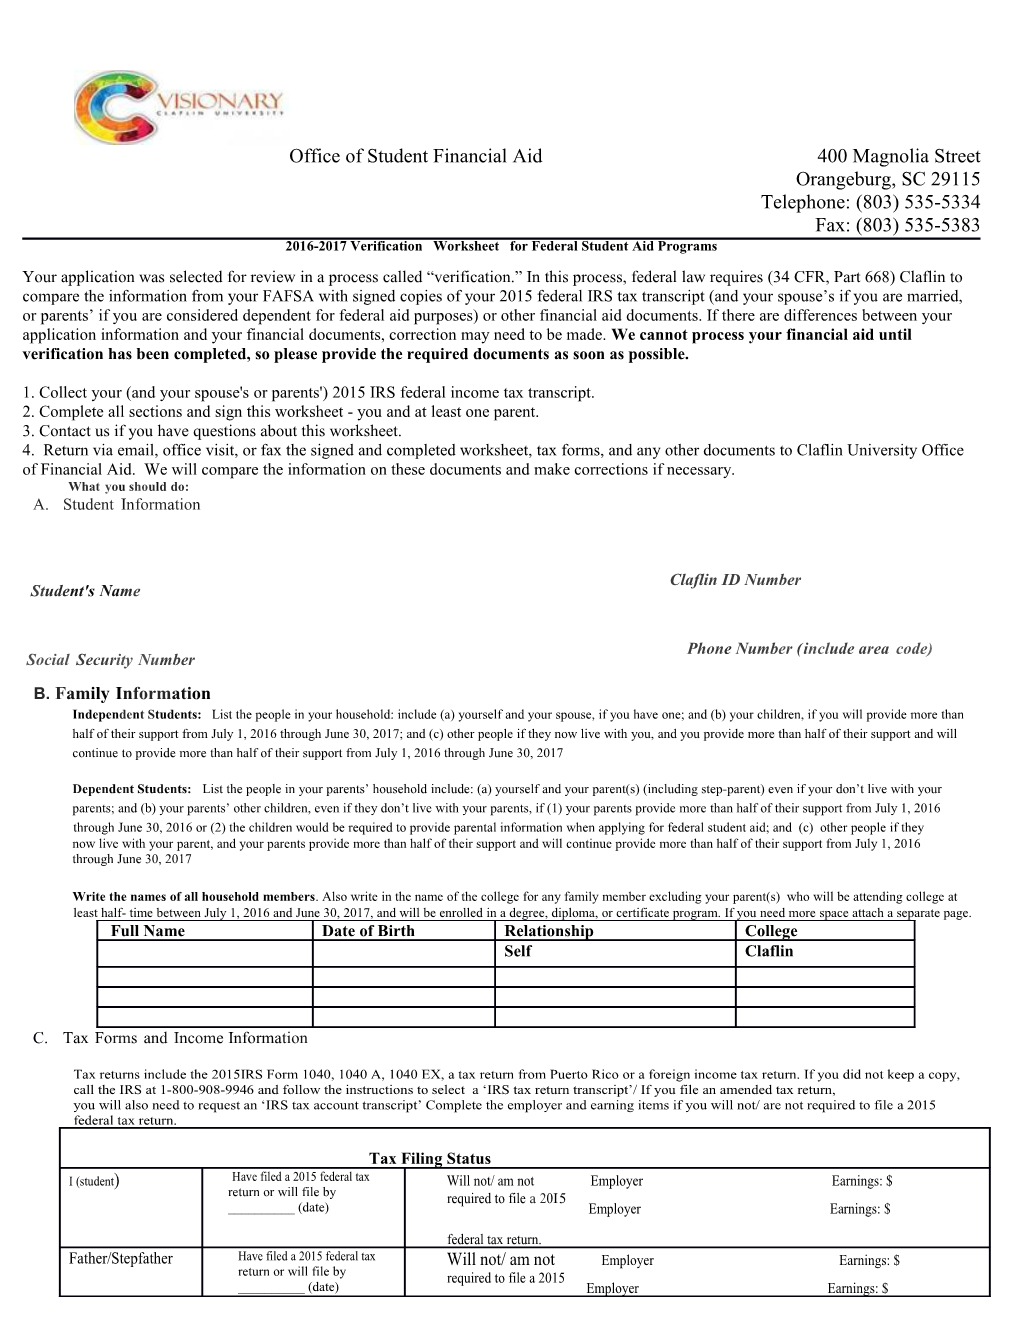 2016-2017 Verification Worksheet for Federal Student Aid Programs